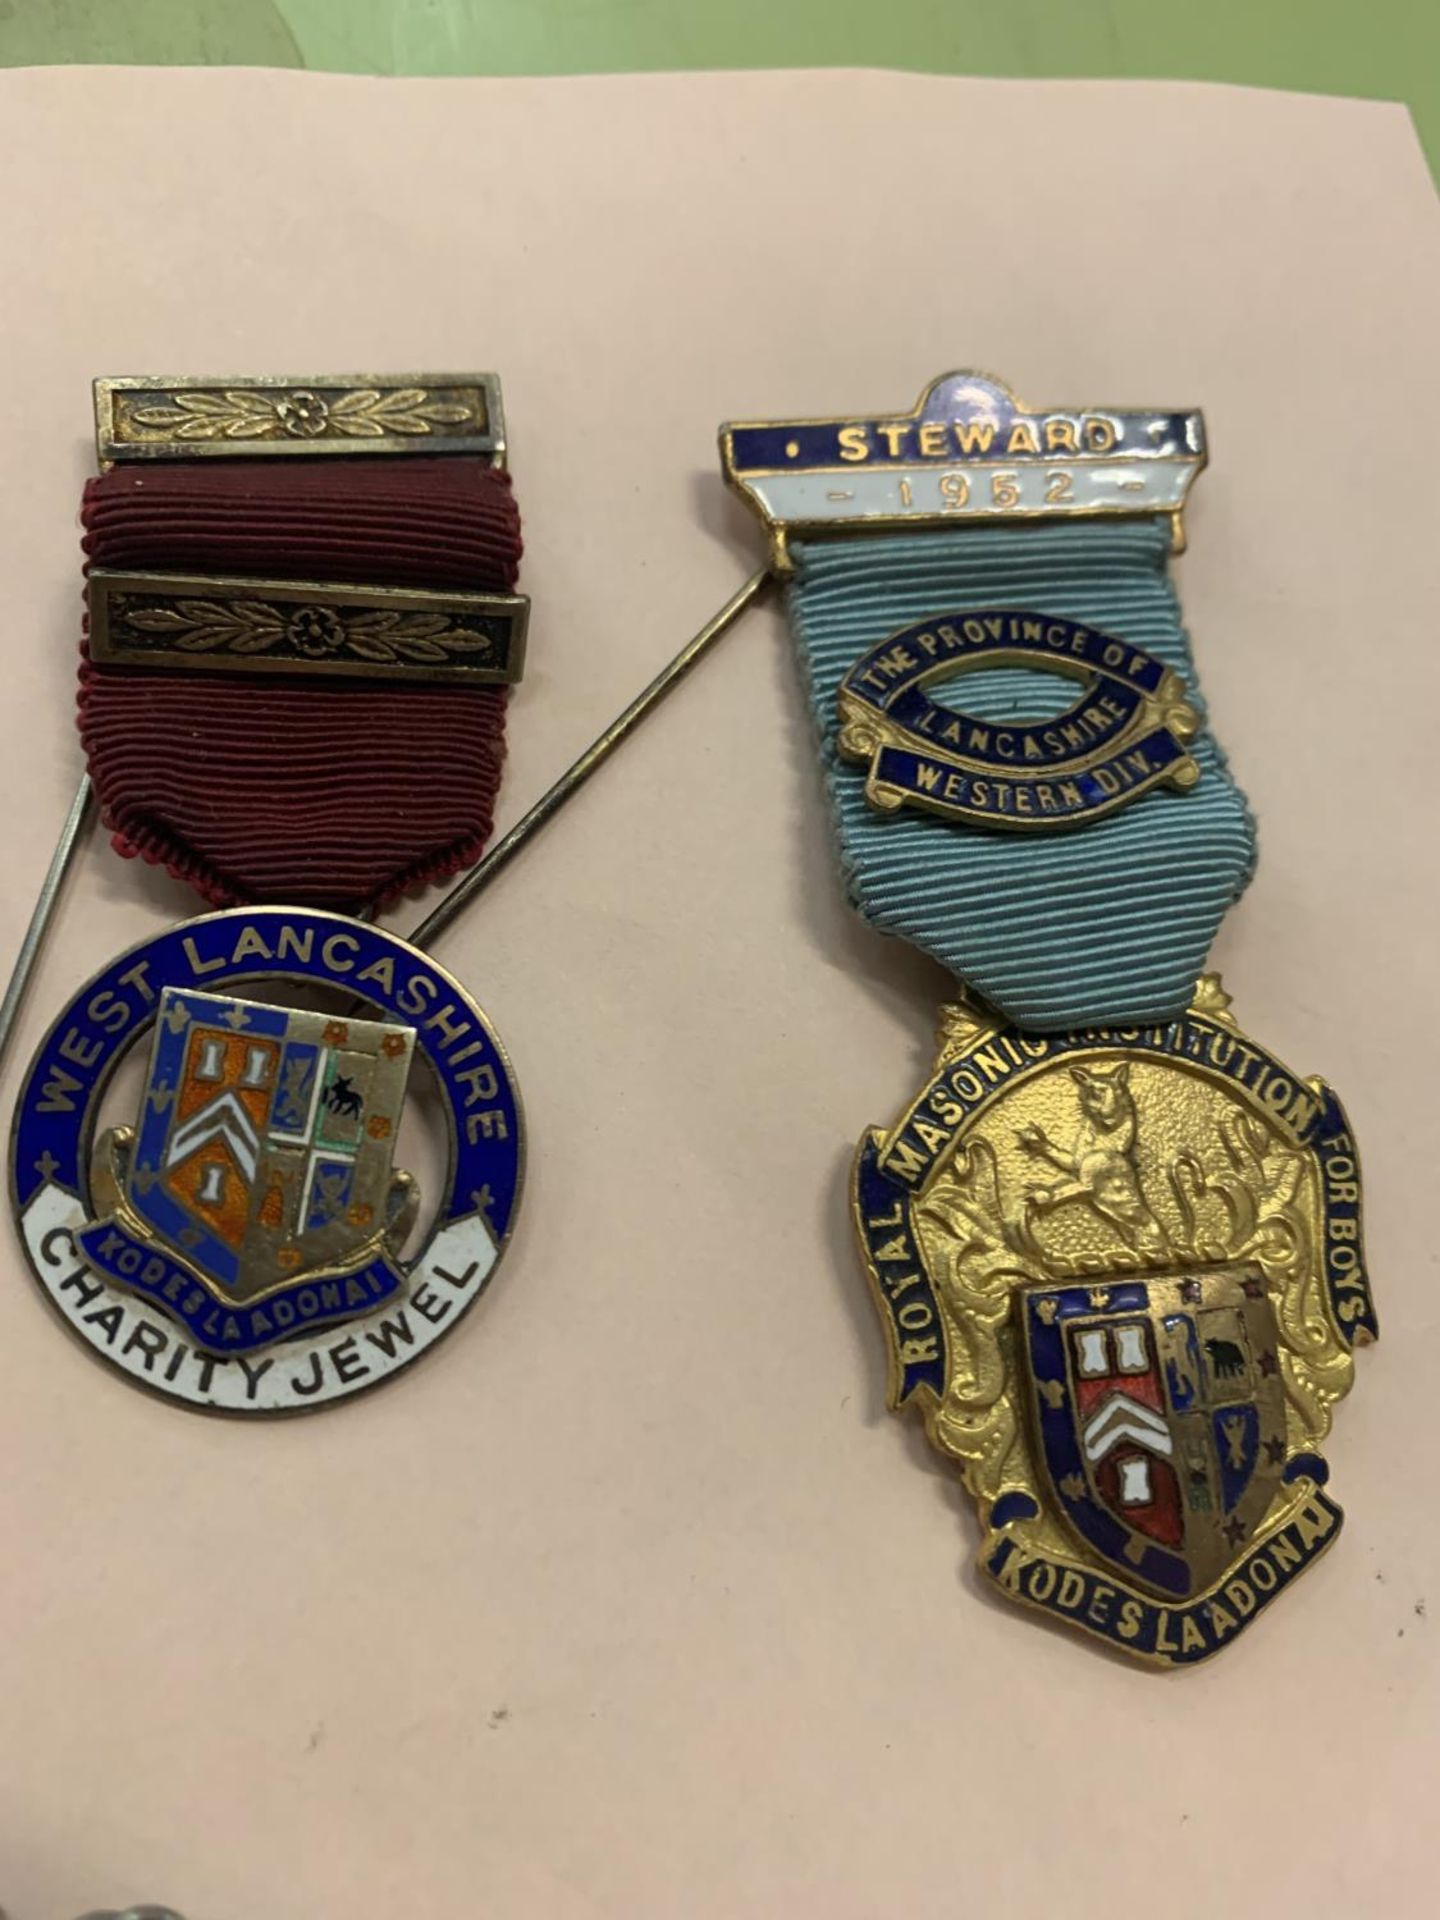 THREE MASONIC MEDALS ONE MARKED SILVER AND A WHITE METAL WIMBLEDON NECK CHECK - Image 2 of 3